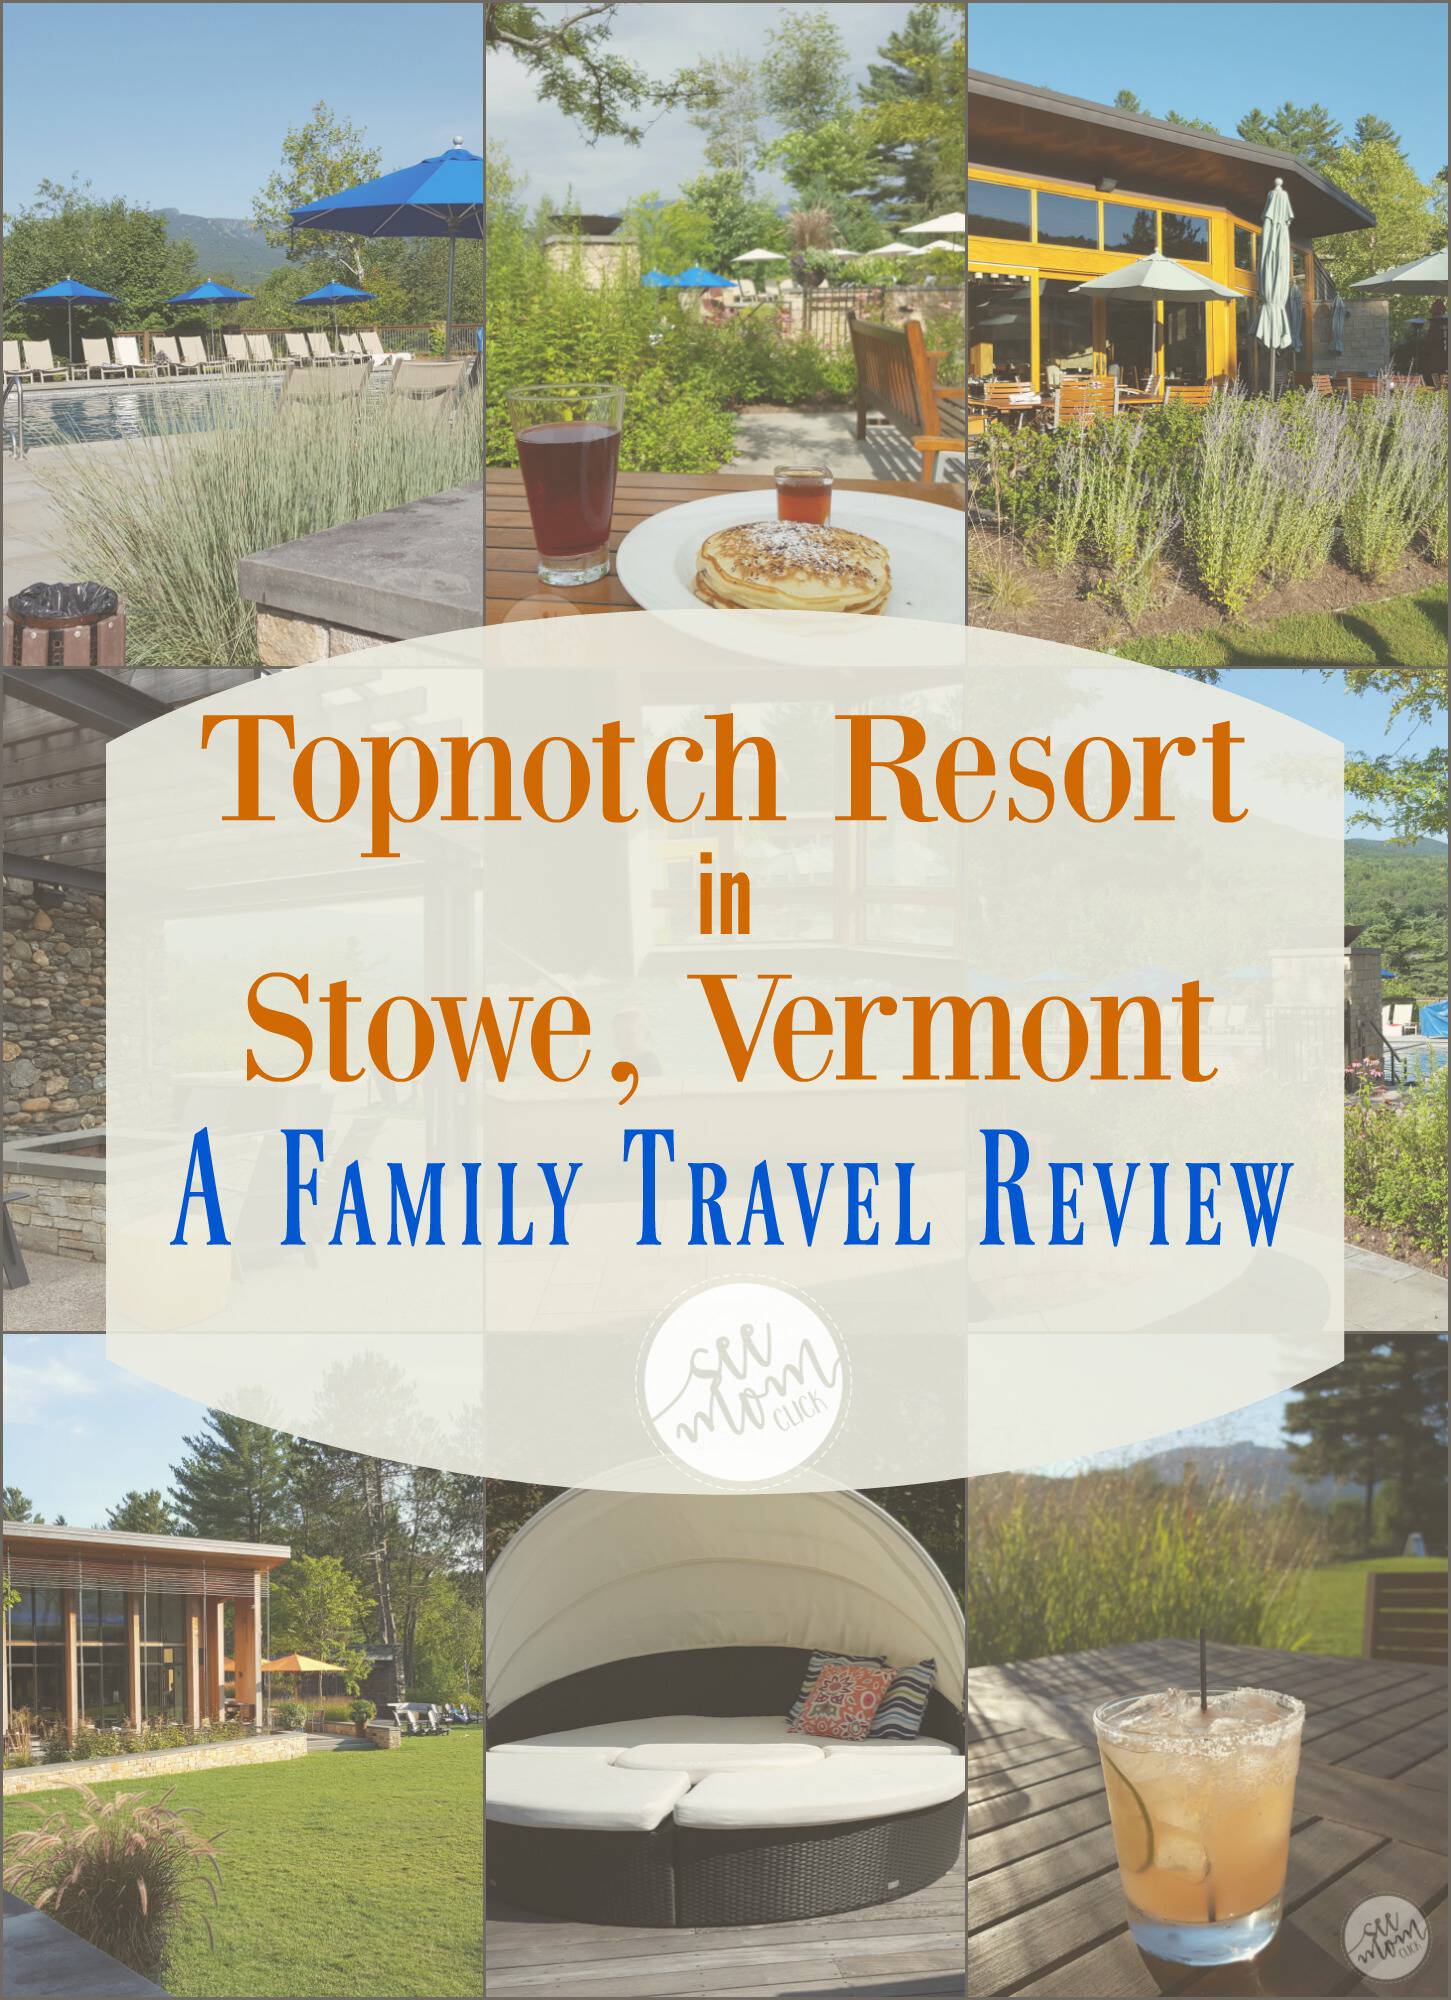 Looking for a family-friendly place to vacation in Stowe, Vermont? Topnotch Resort is the perfect blend of luxury and family travel fun!